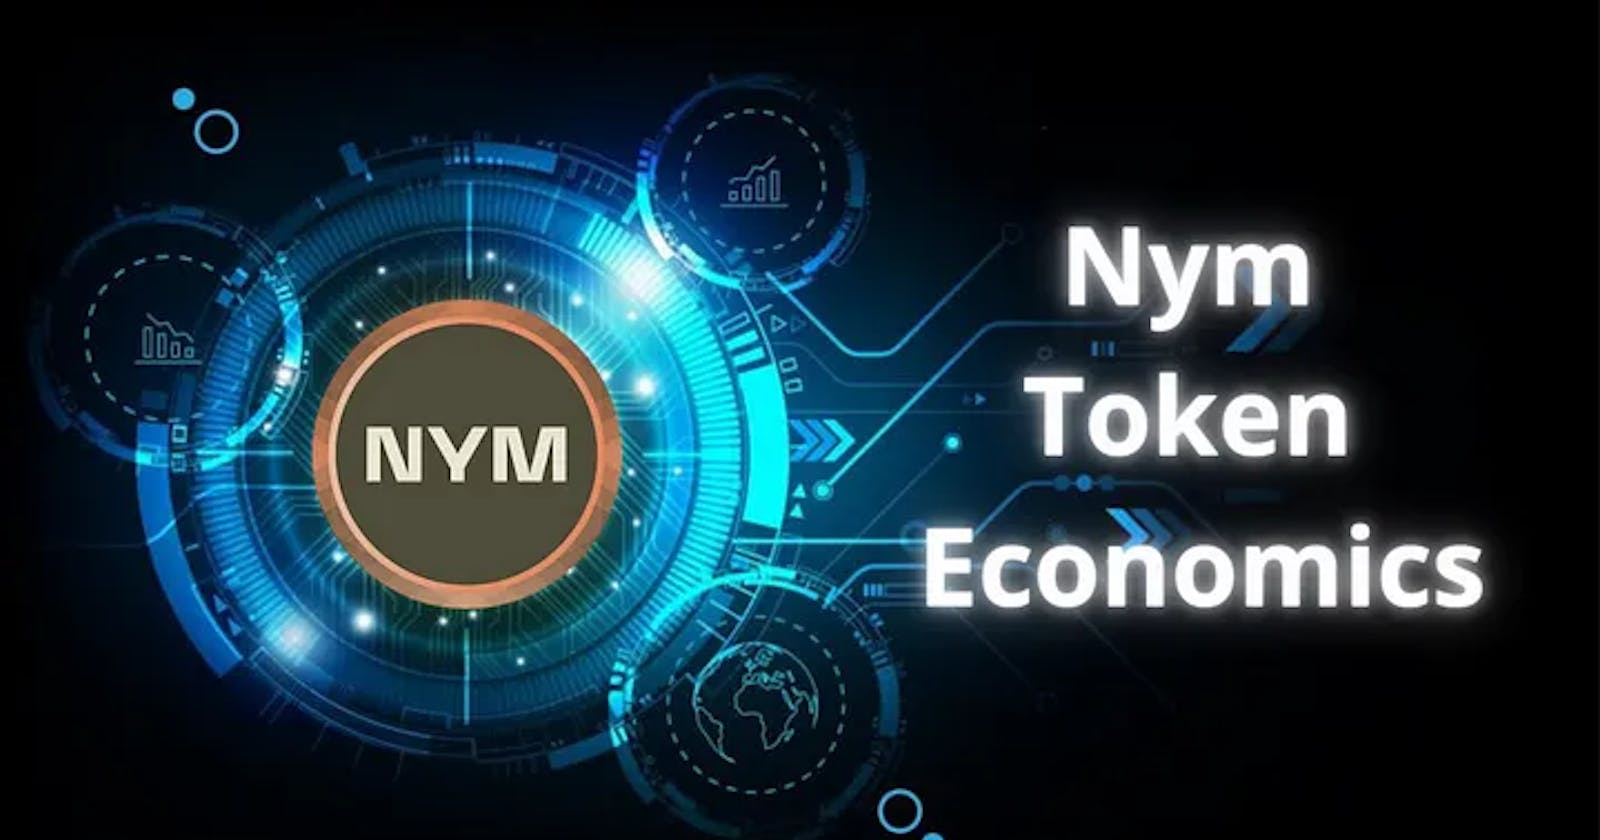 Nym Token Economics: A Comprehensive Overview of Vesting, Supply, and Staking Parameters